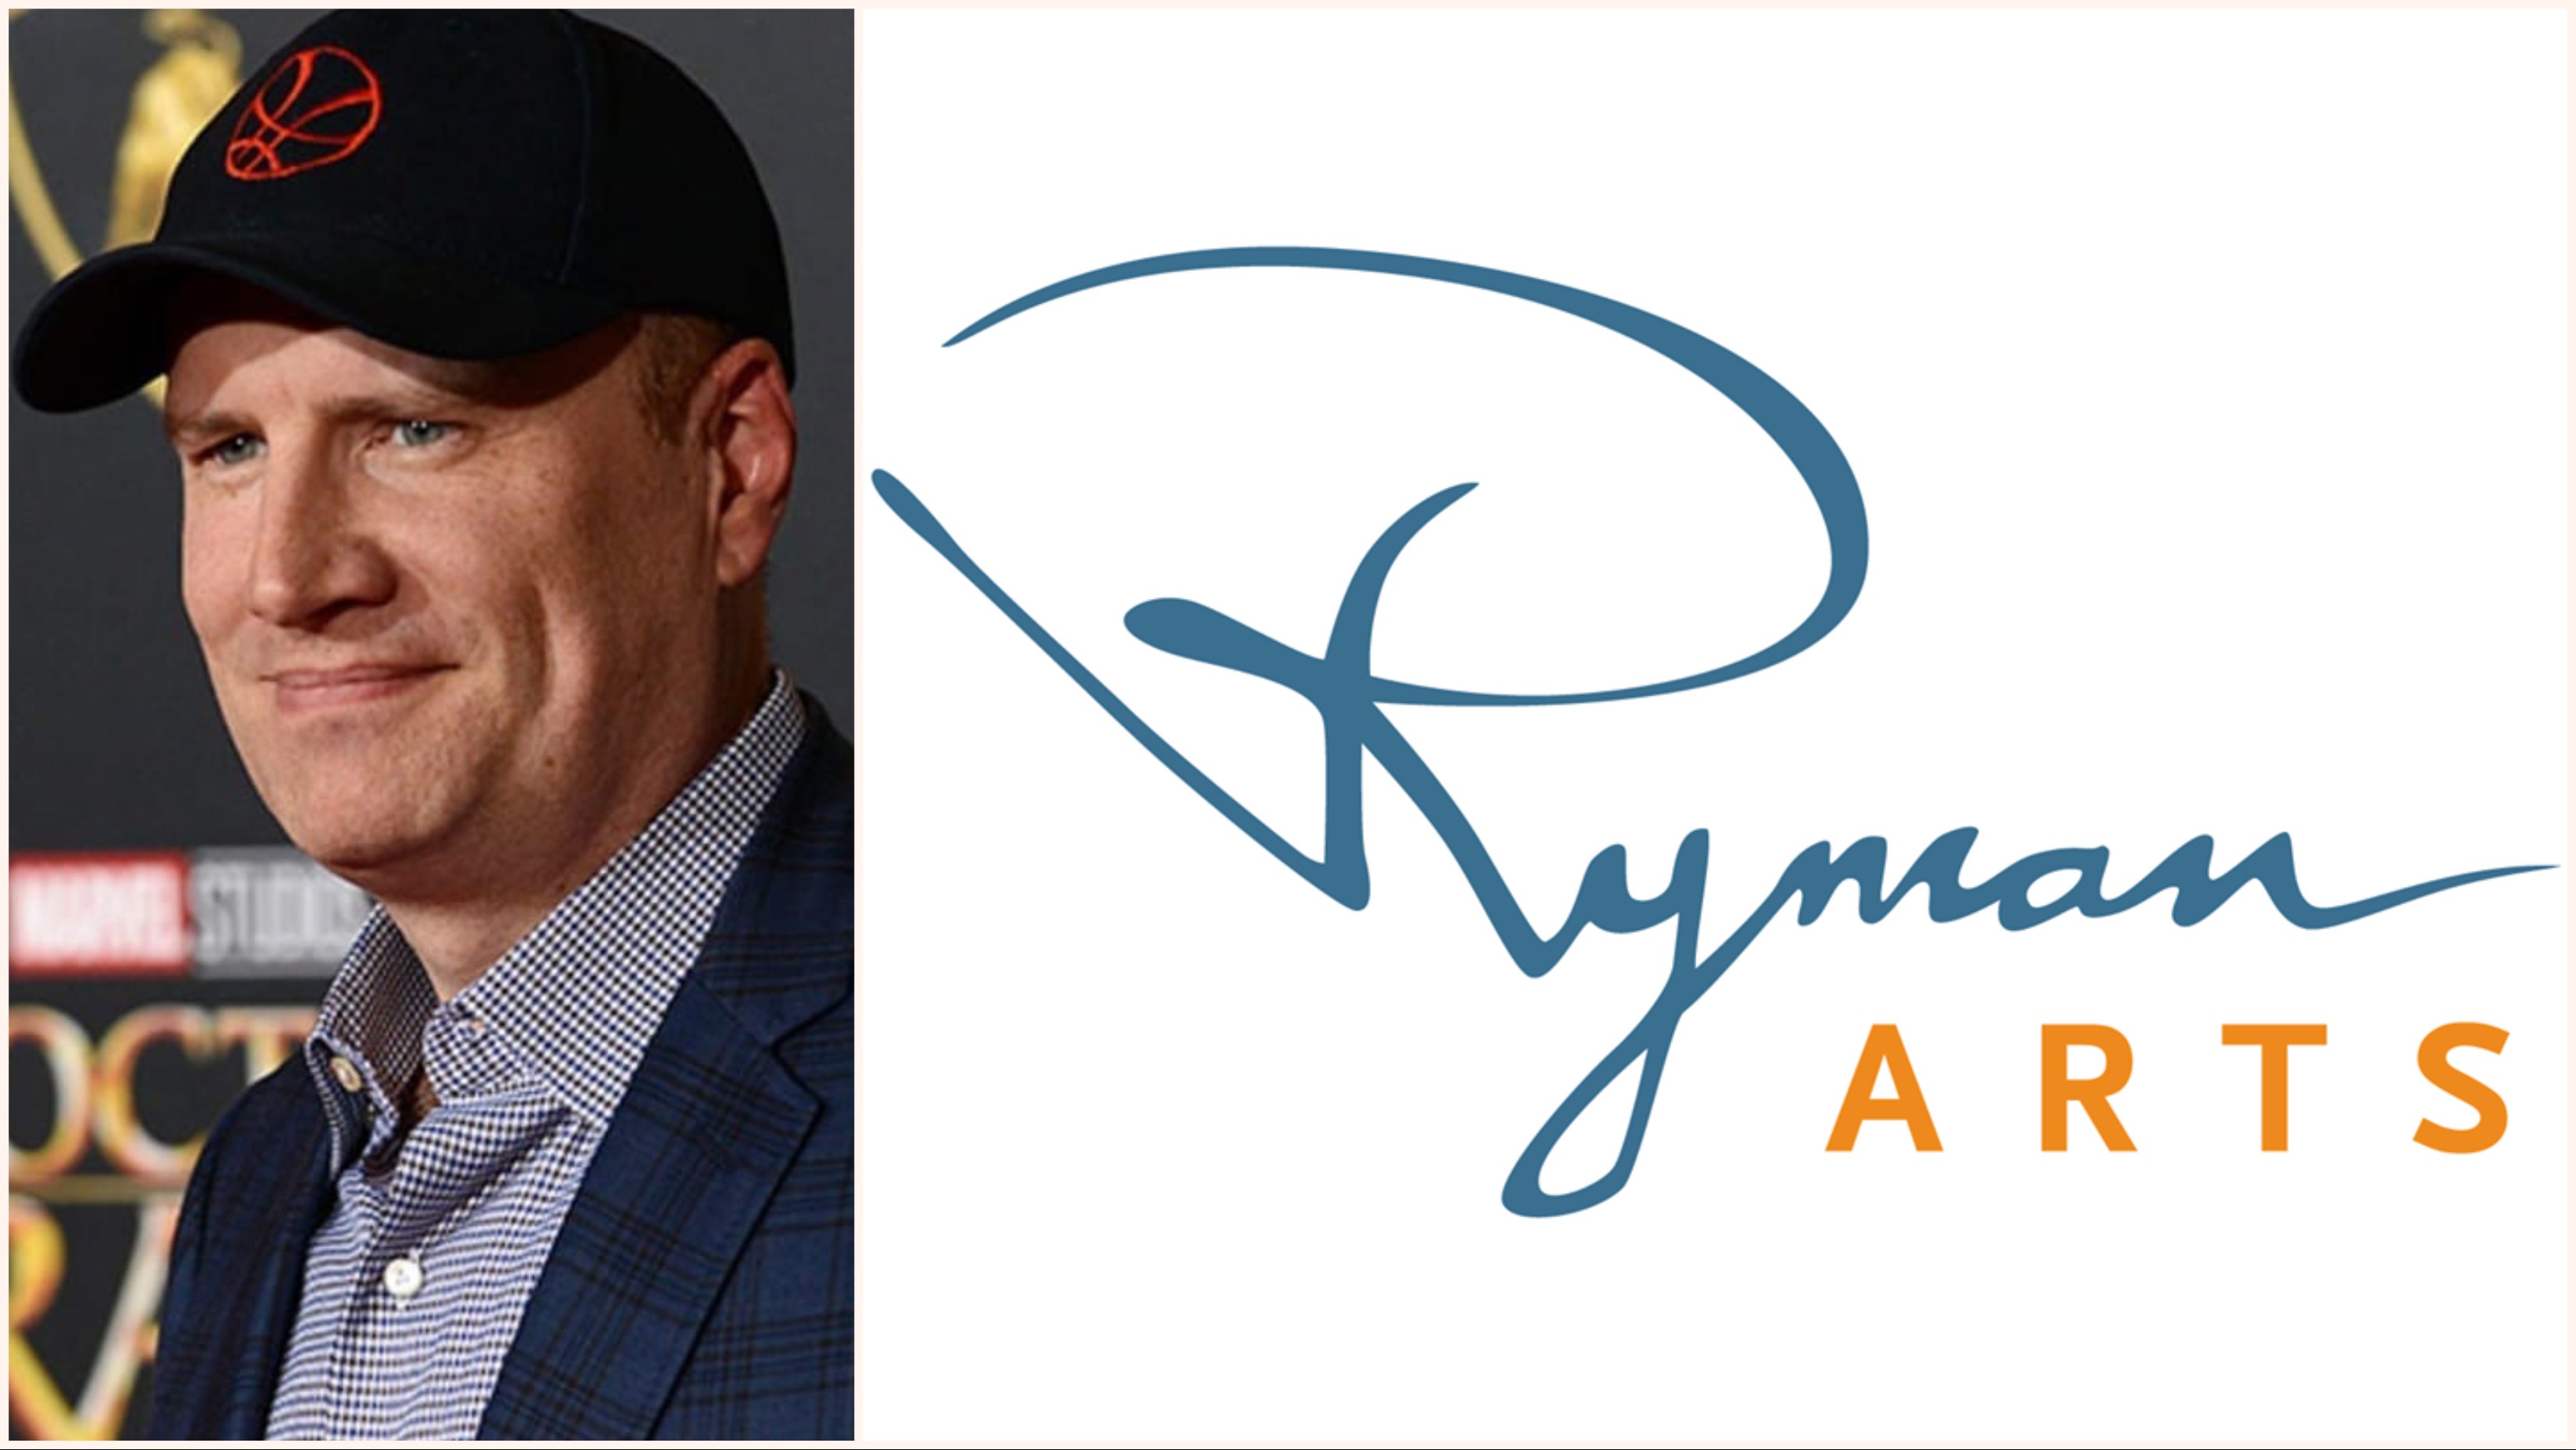 Marvel Studios President Kevin Feige will be honored by The Ryman Arts Board with the first Marty & Leah Sklar Creative Visionary Award.